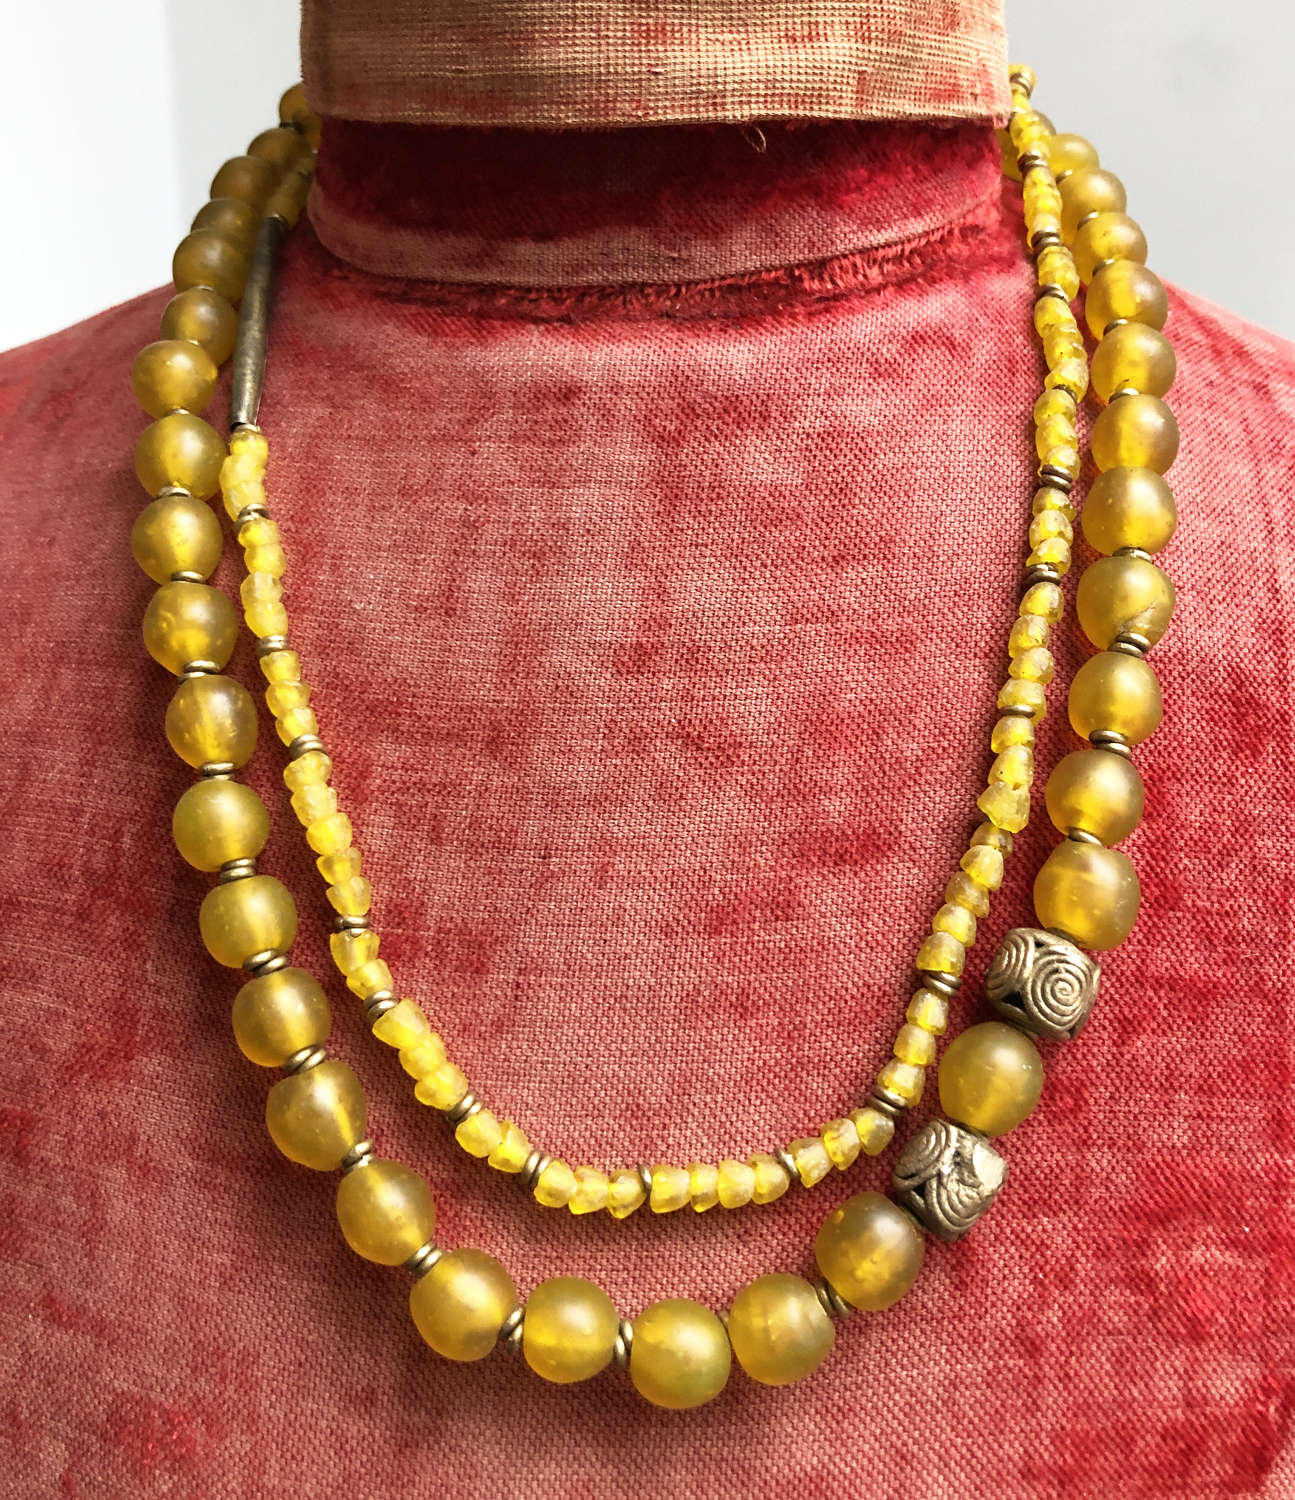 Unusual Old Yellow Glass Beads with brass details